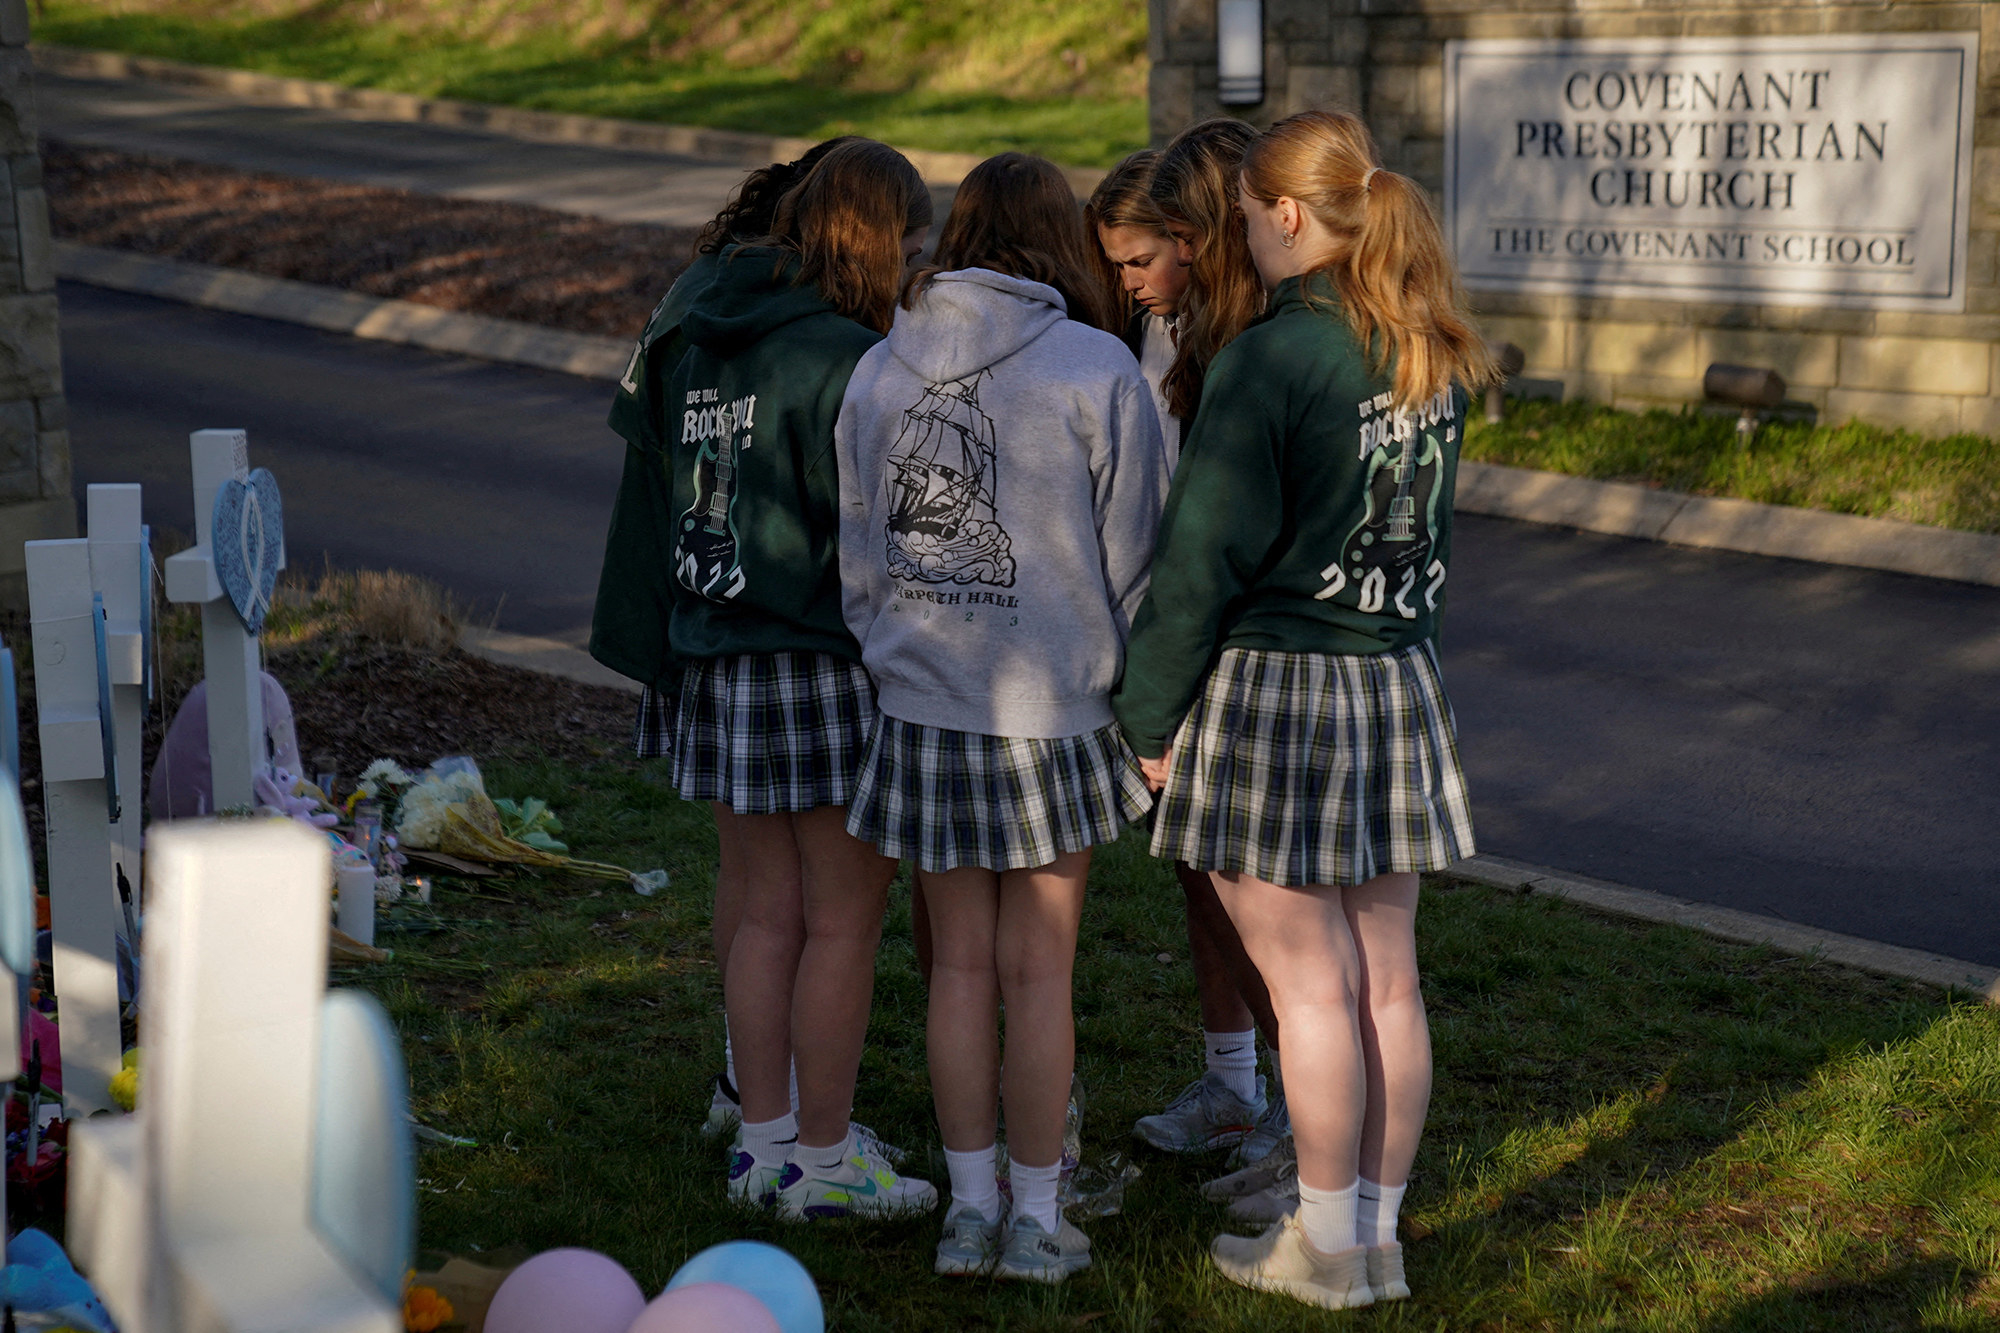 a small group of students huddle in prayer next to a memorial